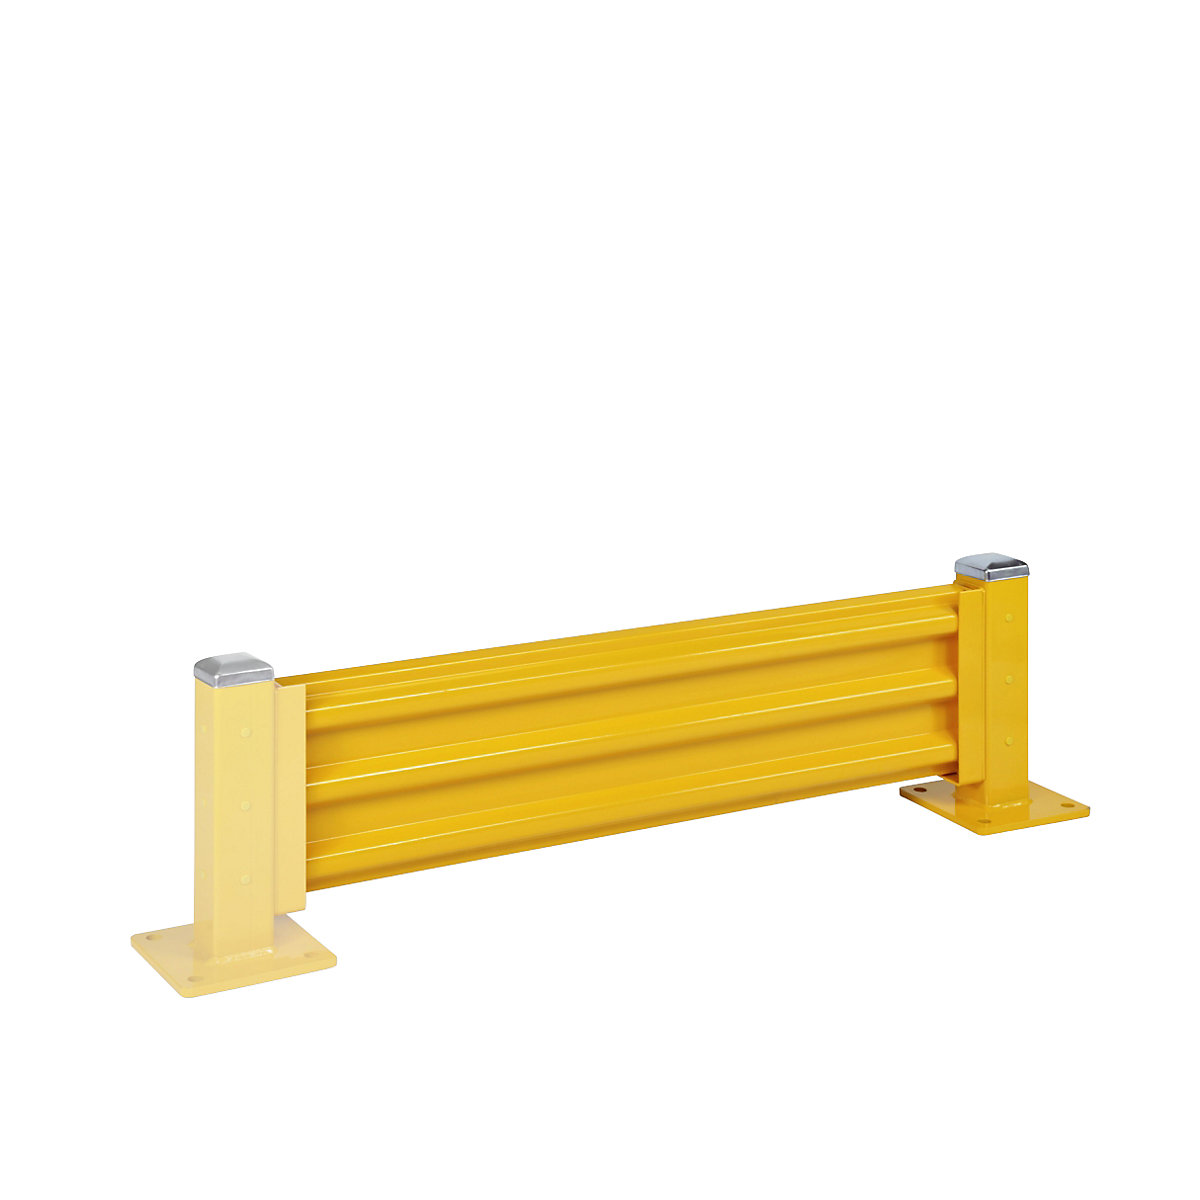 Crash protection wall, height 480 mm